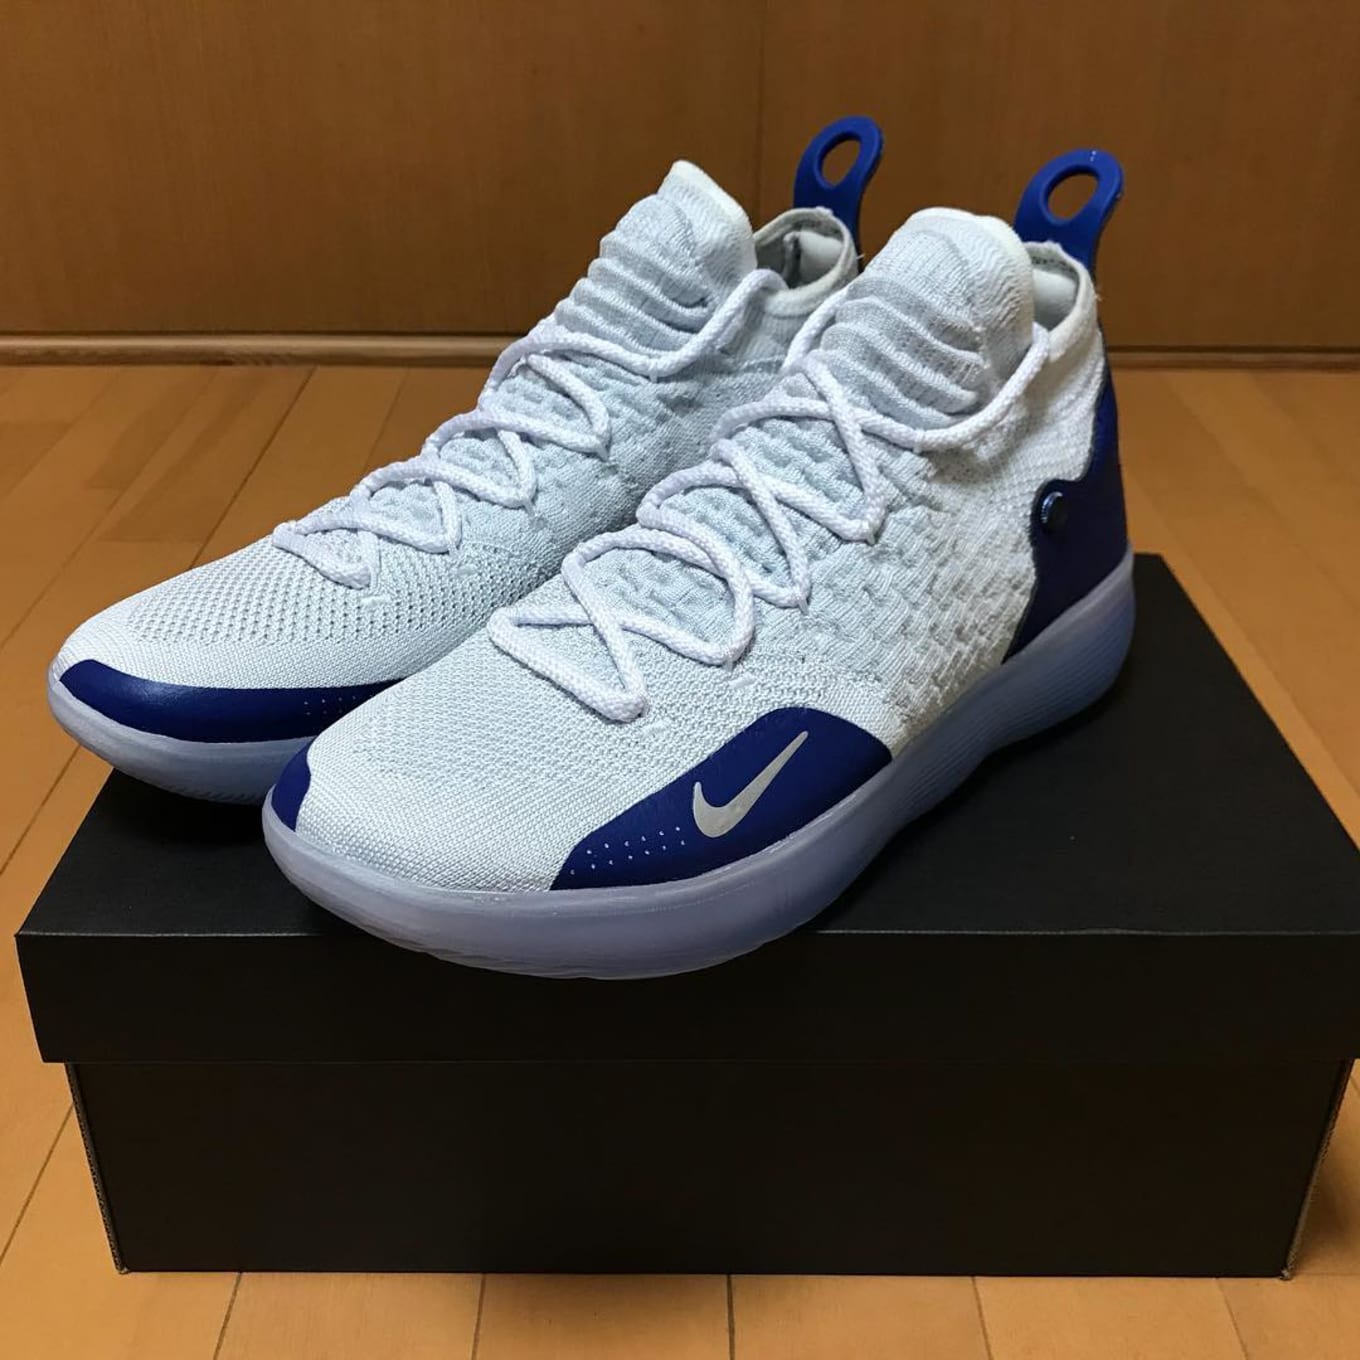 kd 11 blue and white